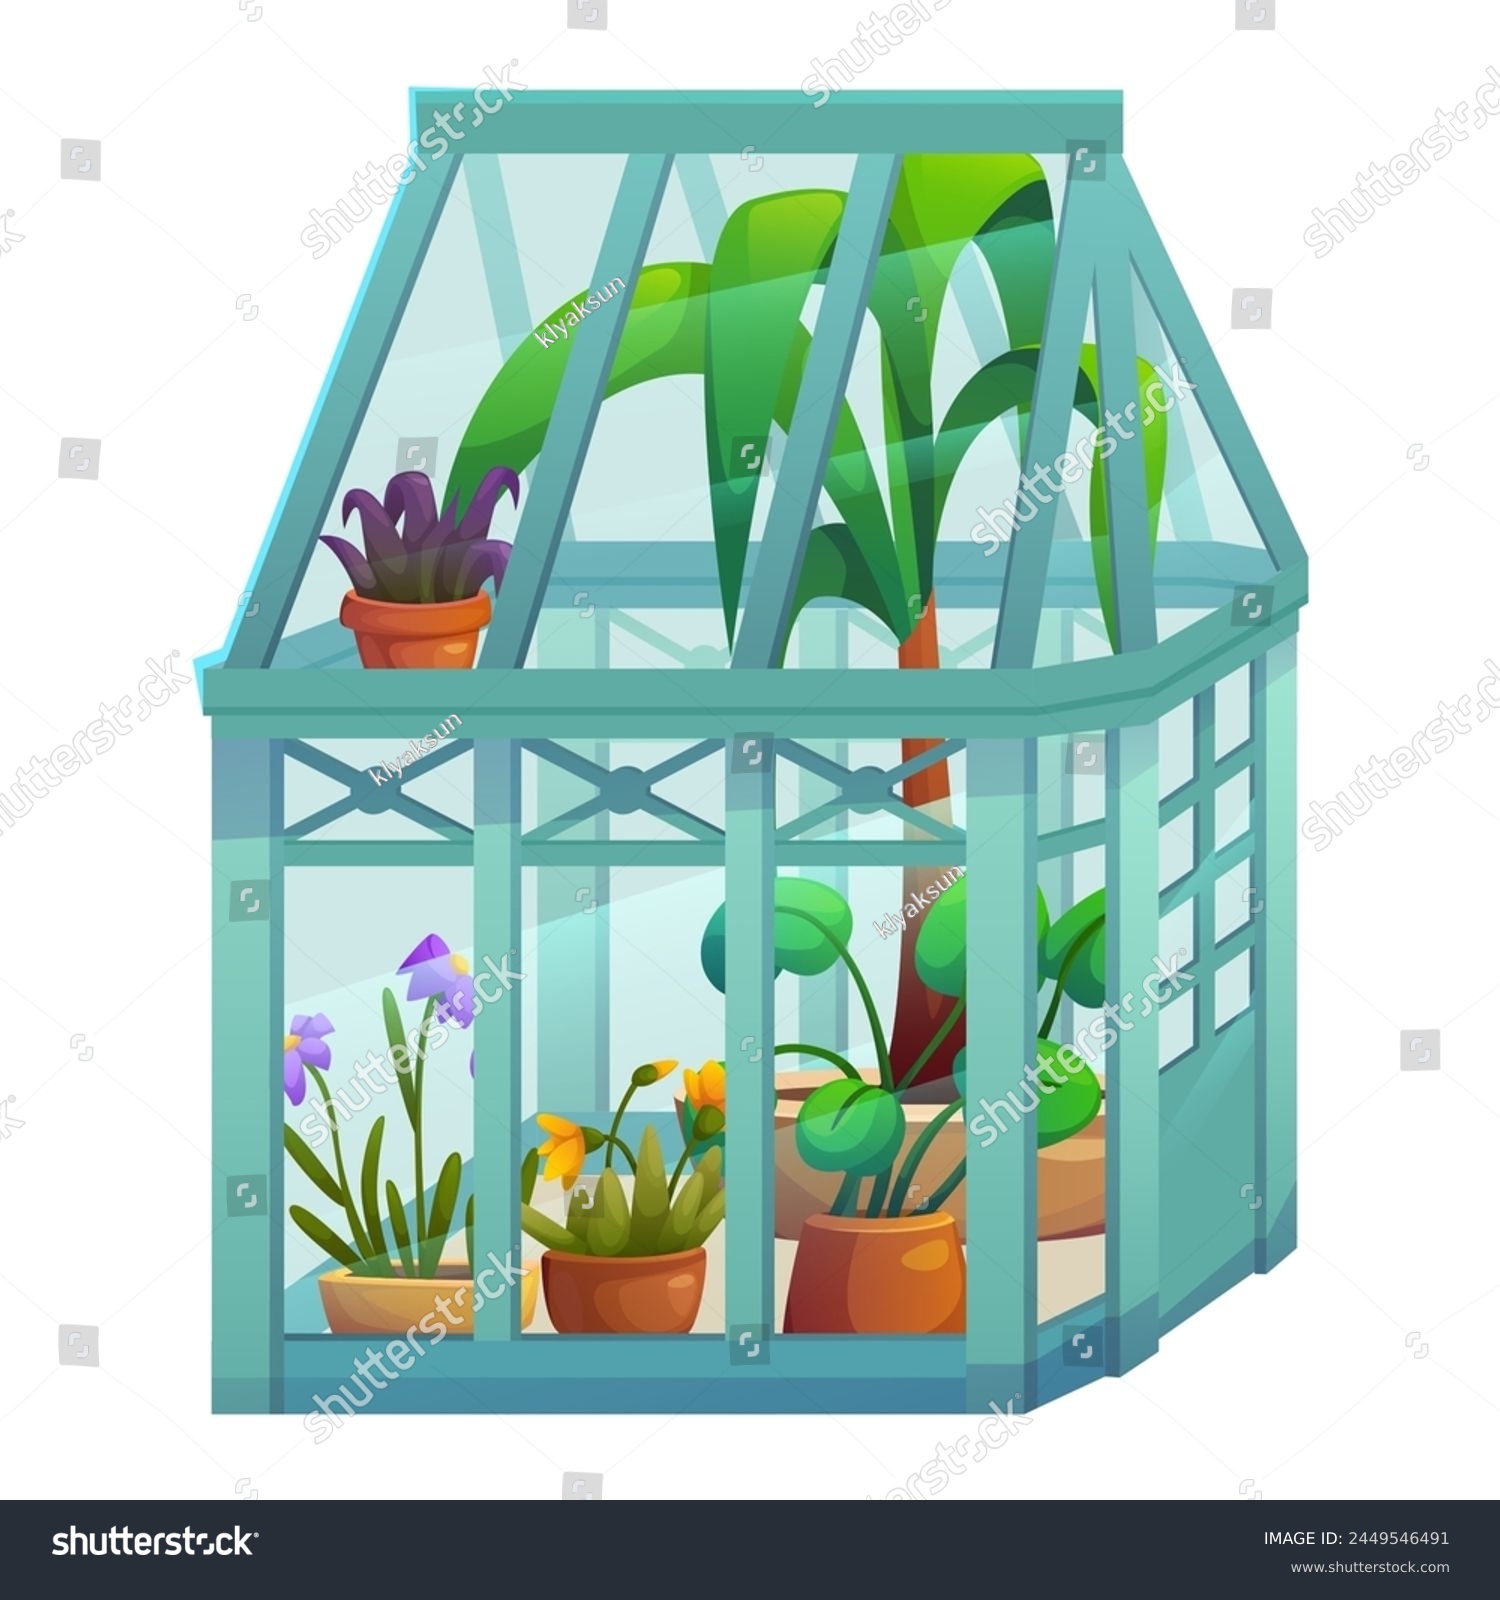 SVG of Plant in glass greenhouse garden isometric vector. Green glasshouse for agriculture nursery. Organic flower home with pot. Biotechnology equipment for palm seedling and cultivation cartoon design. svg